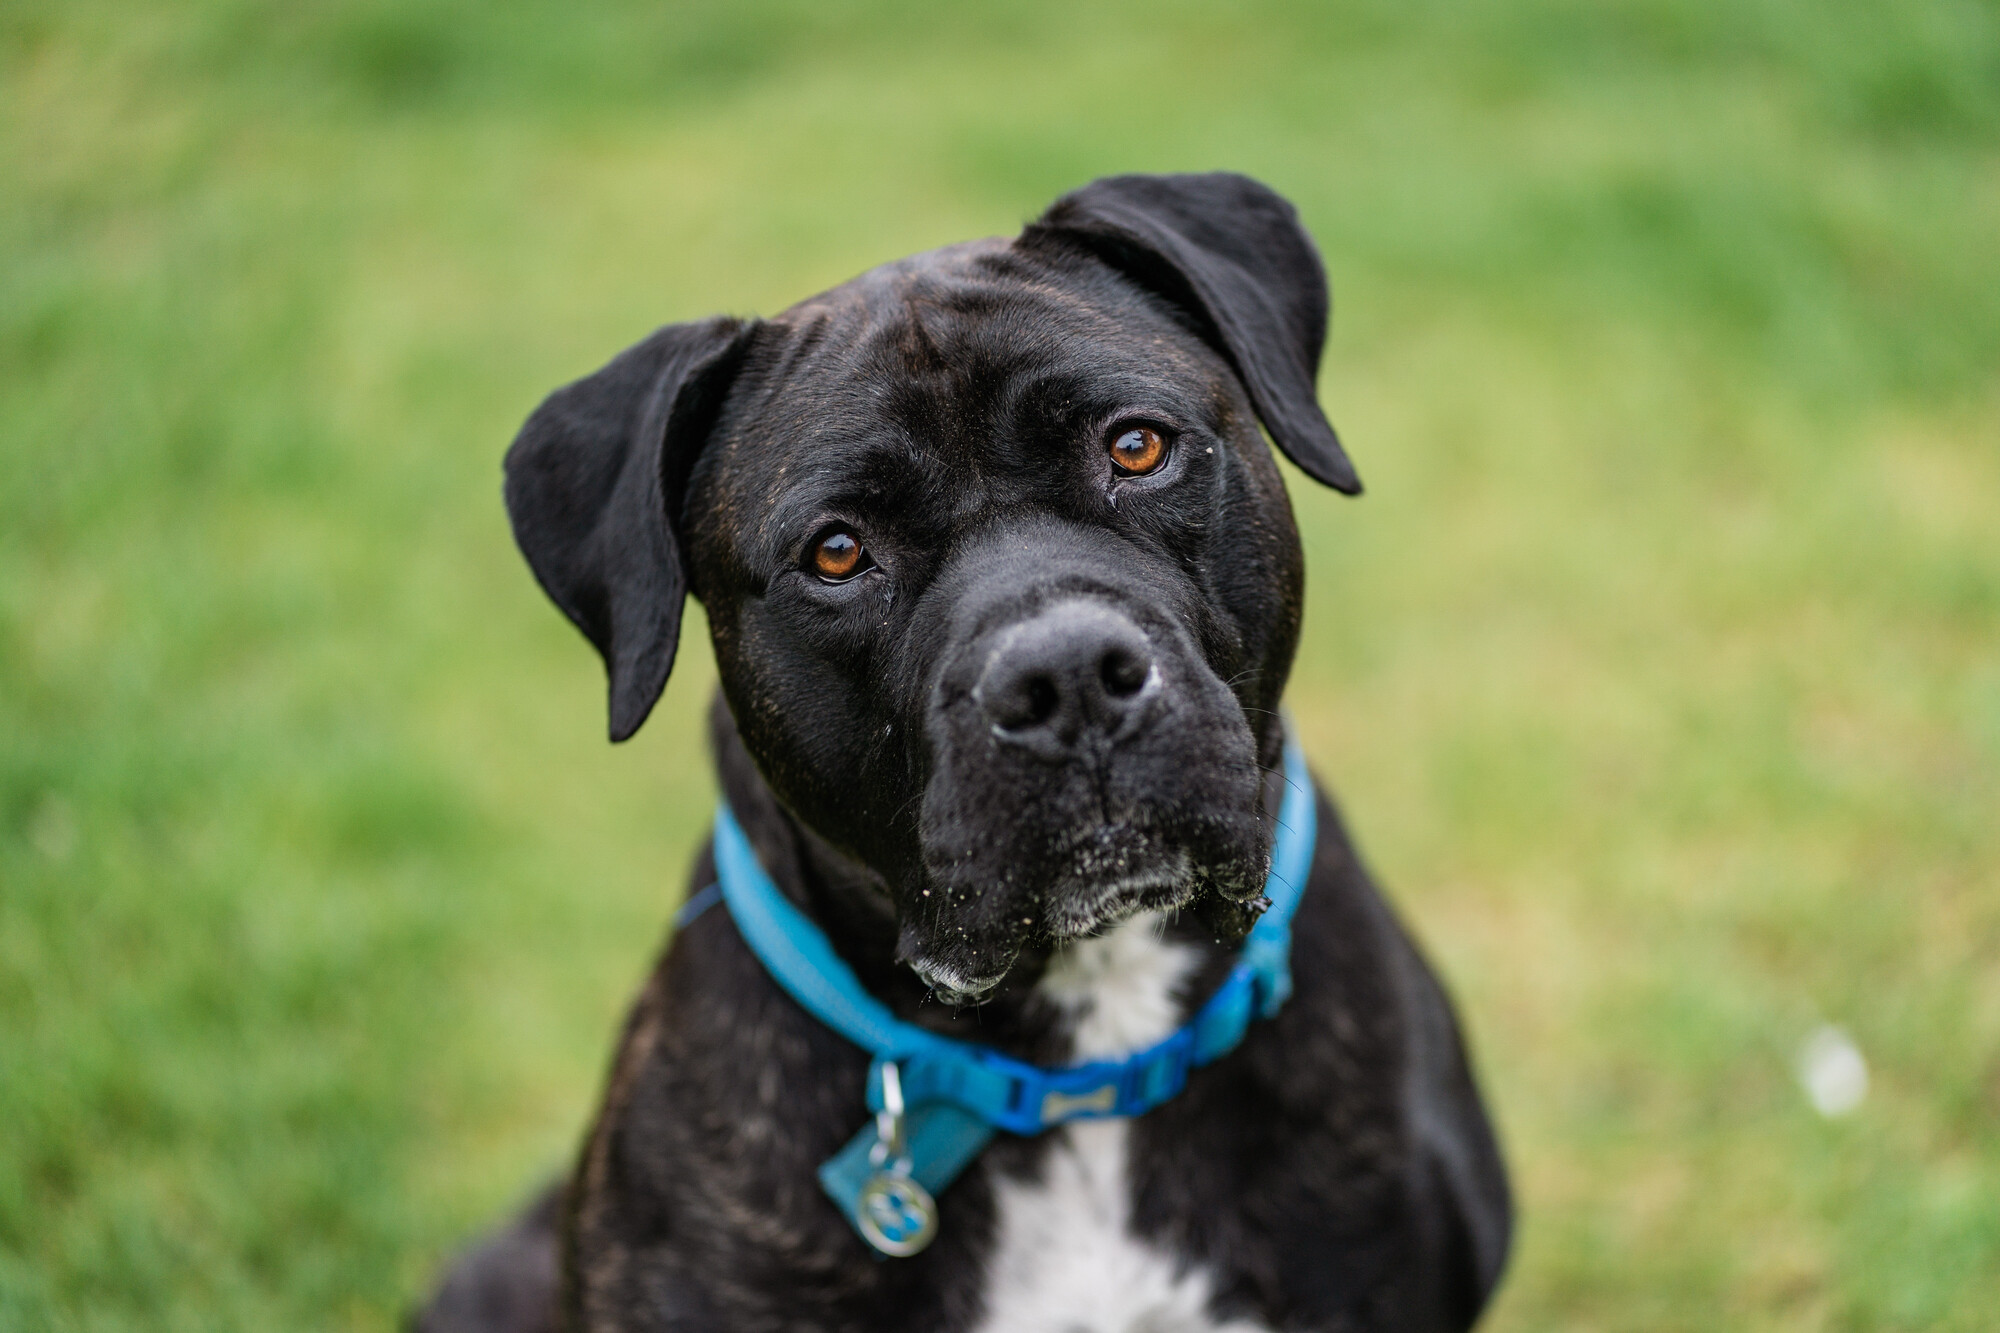 Black cane corso Rupert wearing a blue collar looking to camera while sitting on grass